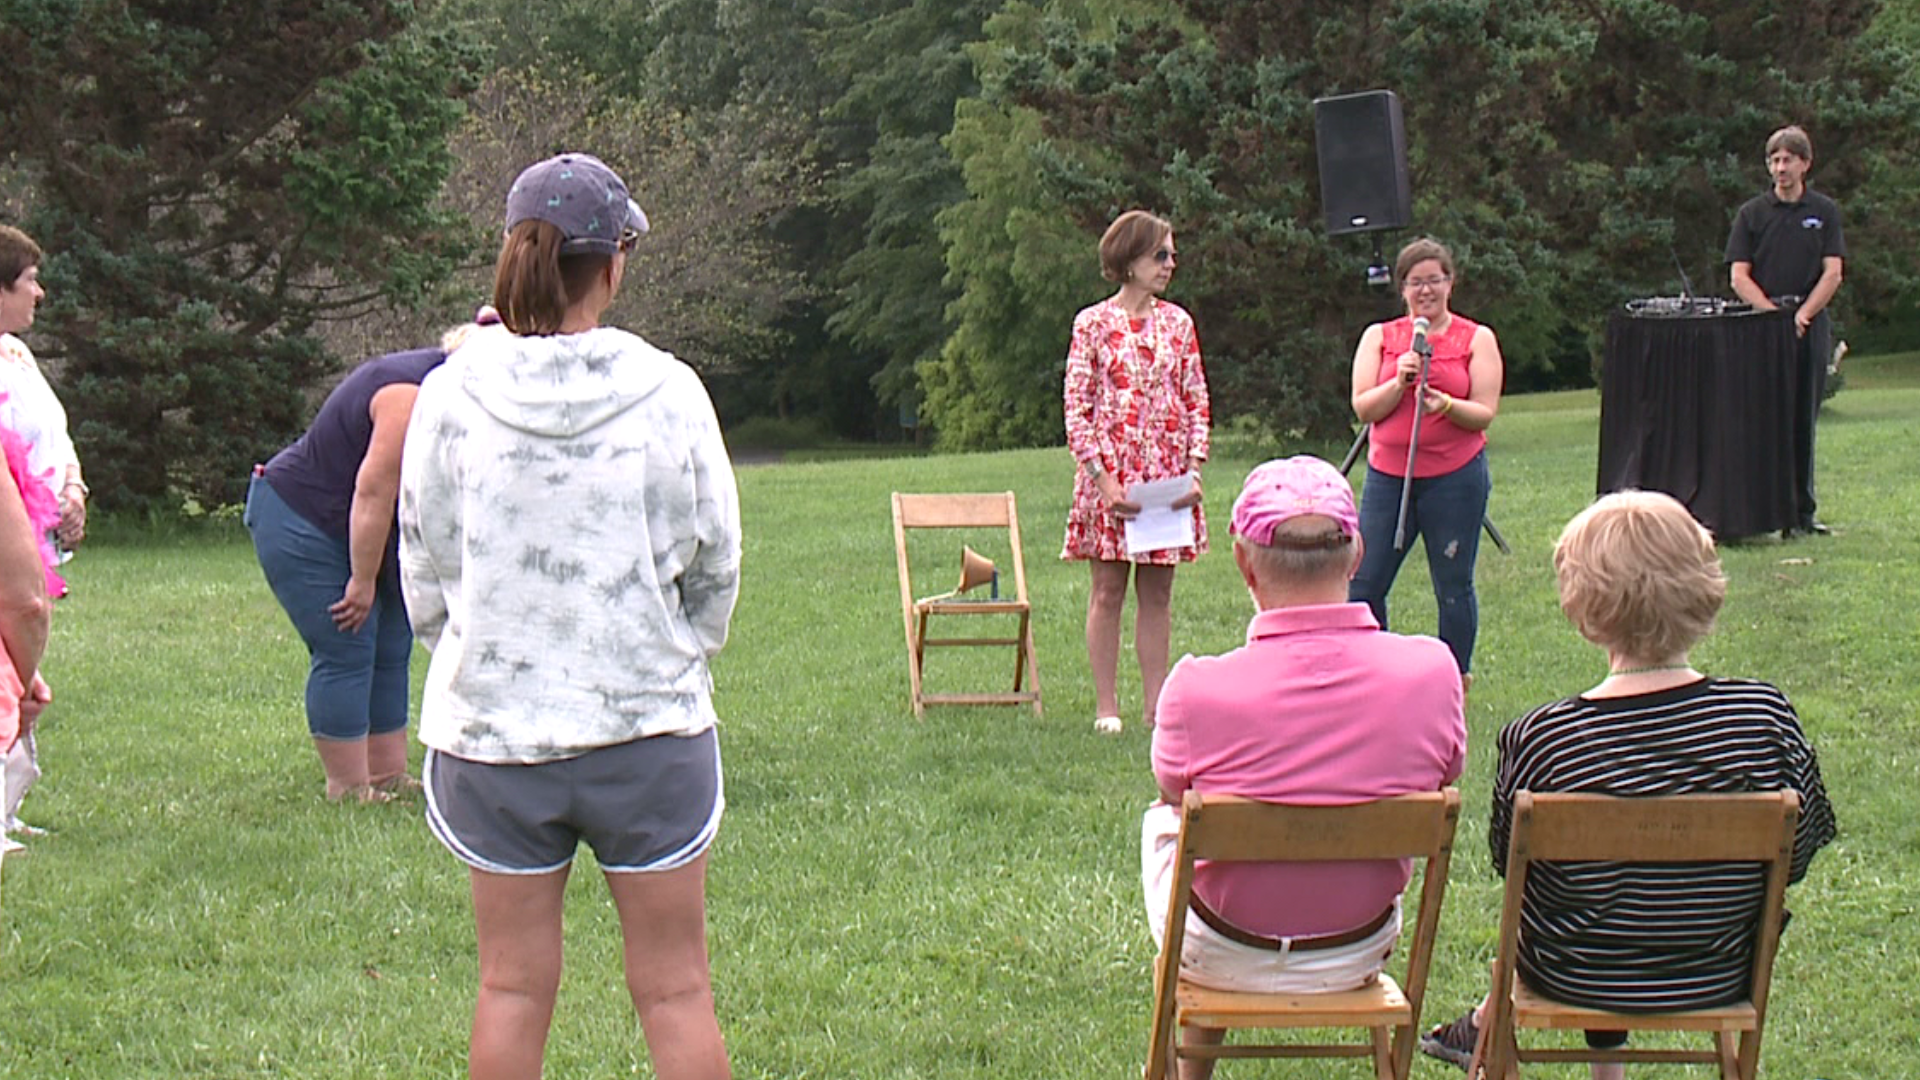 The Northeast Regional Cancer Institute hosted its annual cancer survivors day at McDade Park.